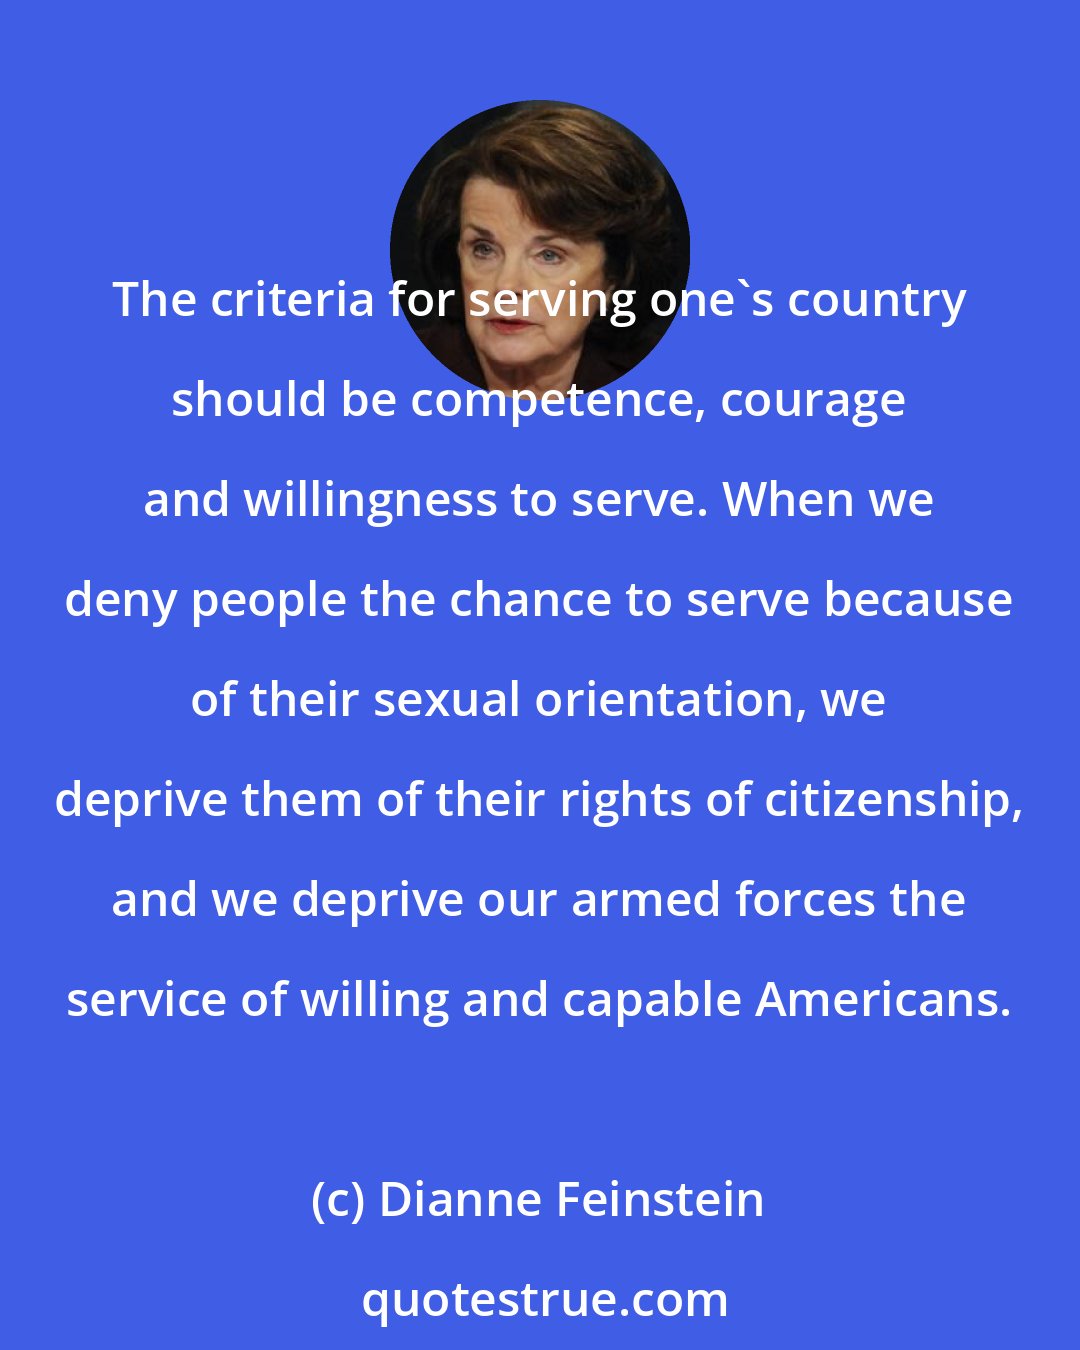 Dianne Feinstein: The criteria for serving one's country should be competence, courage and willingness to serve. When we deny people the chance to serve because of their sexual orientation, we deprive them of their rights of citizenship, and we deprive our armed forces the service of willing and capable Americans.